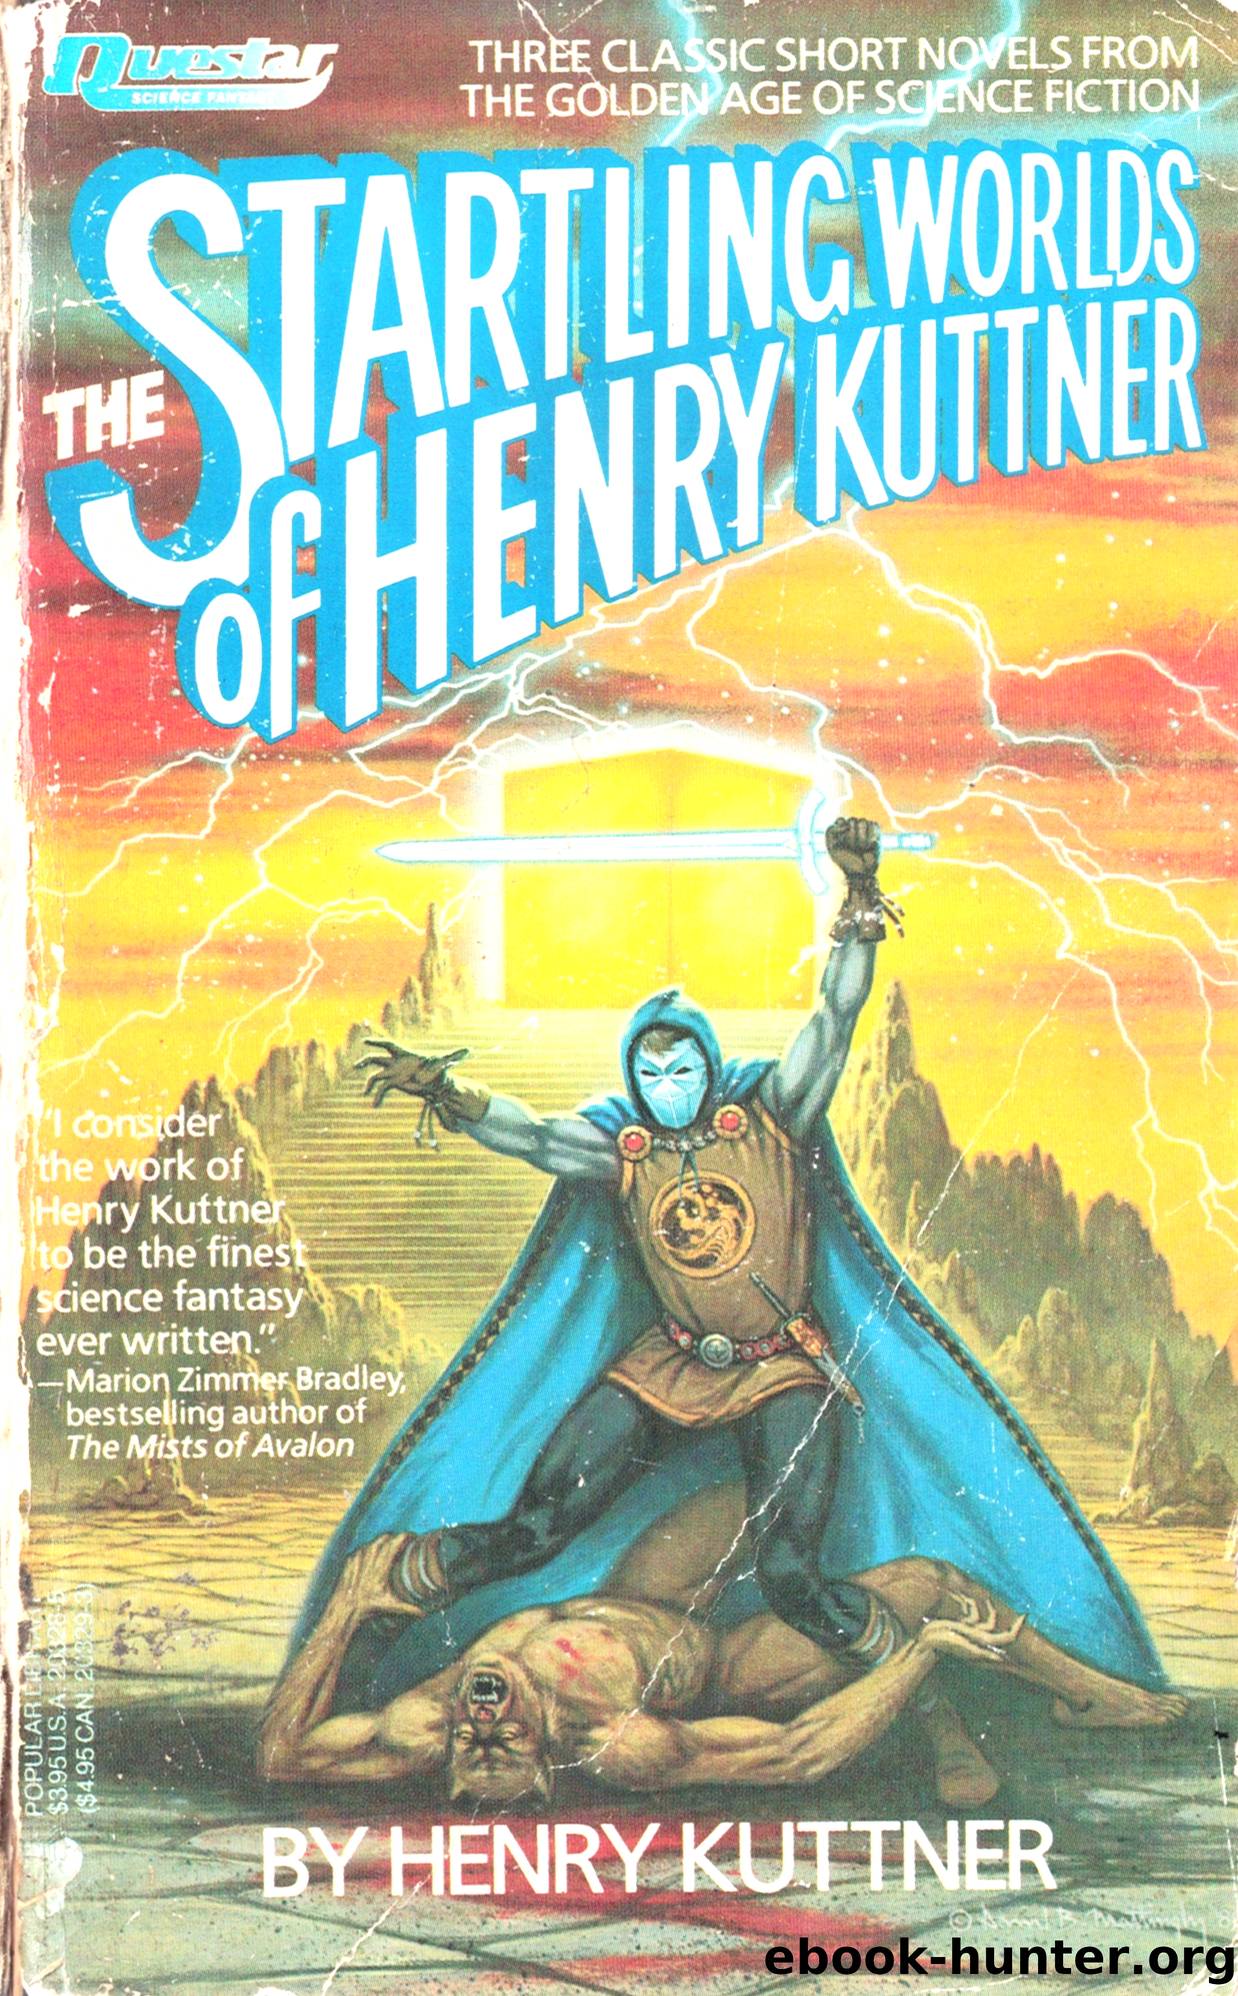 Thev Startling Stories of Henry Kuttner by Unknown Author